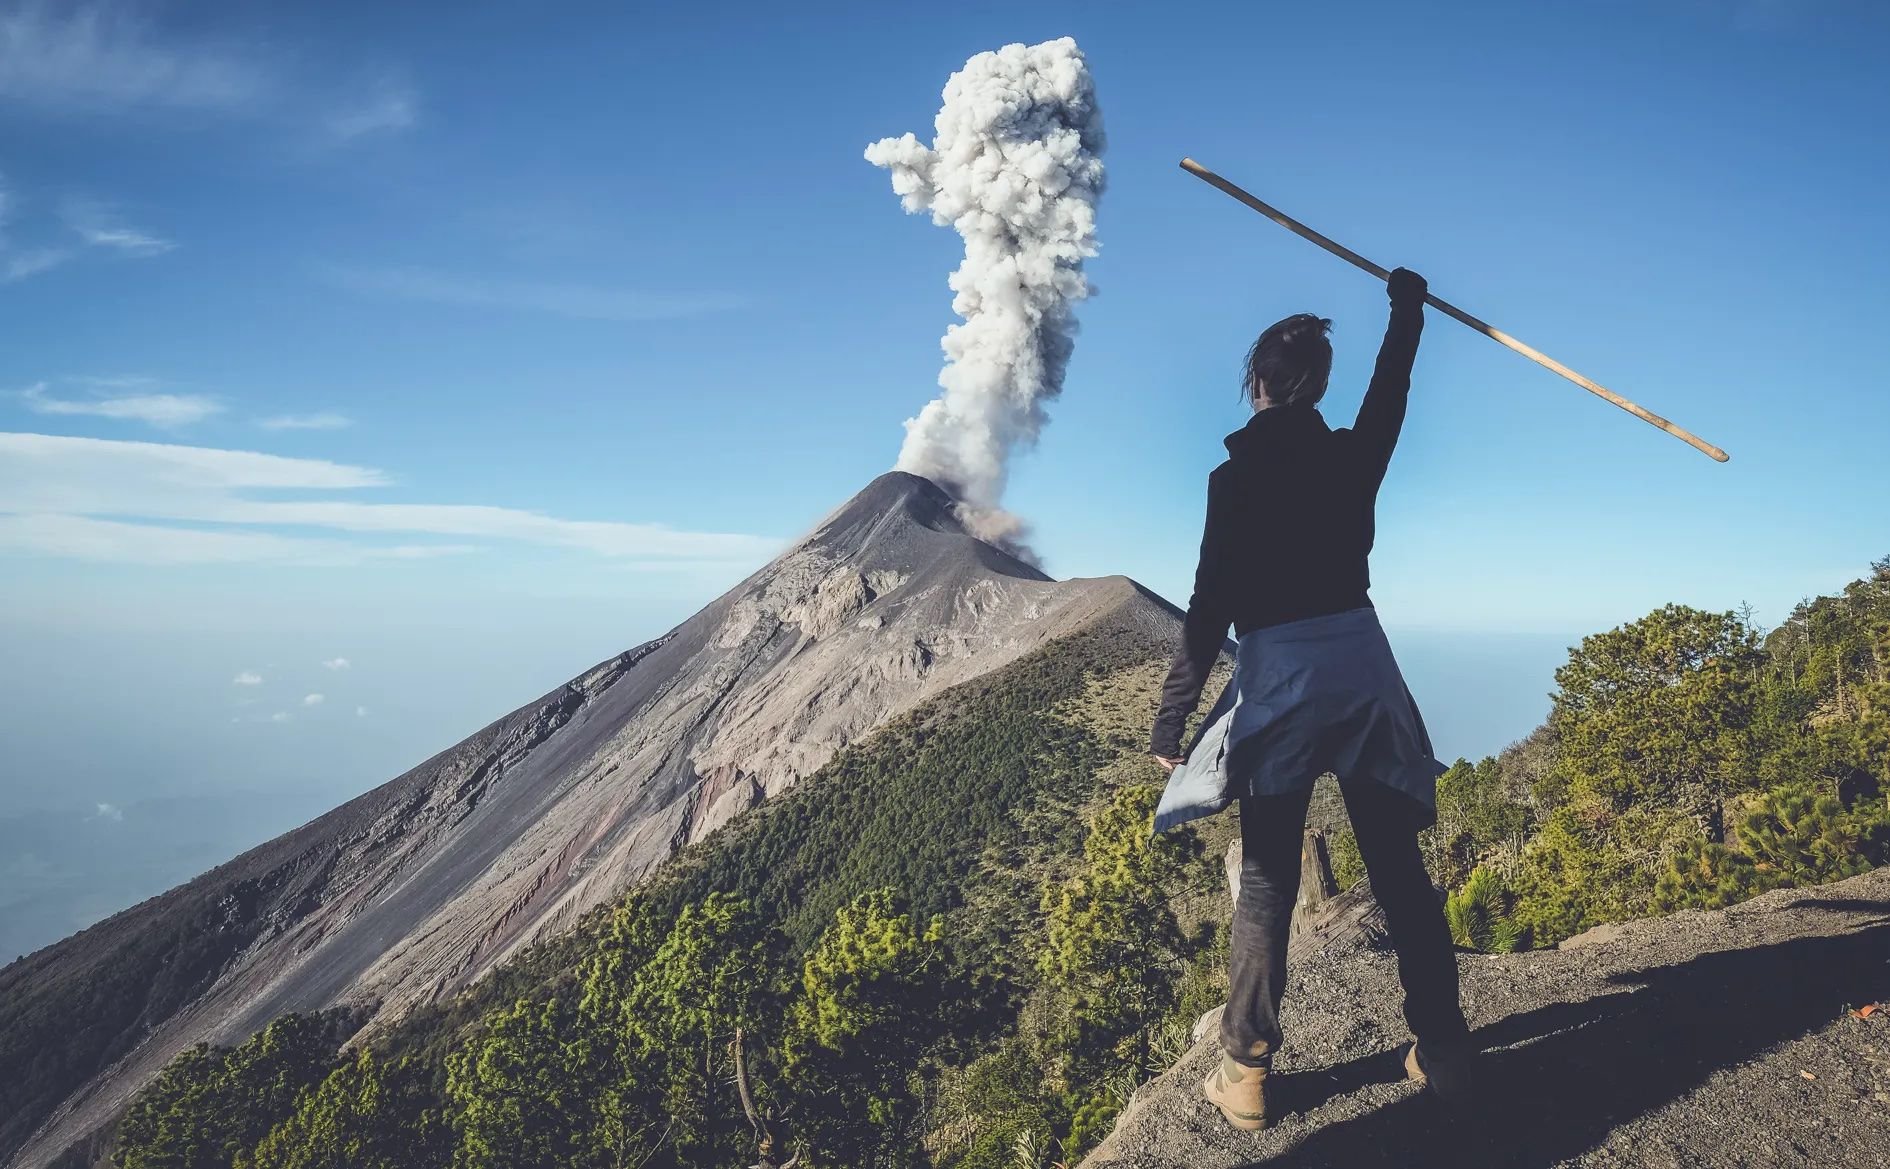 A hiker stands on the summit of Santa Maria volcano in Guatemala, looking out at an eruption from nearby Santiaguito summit.